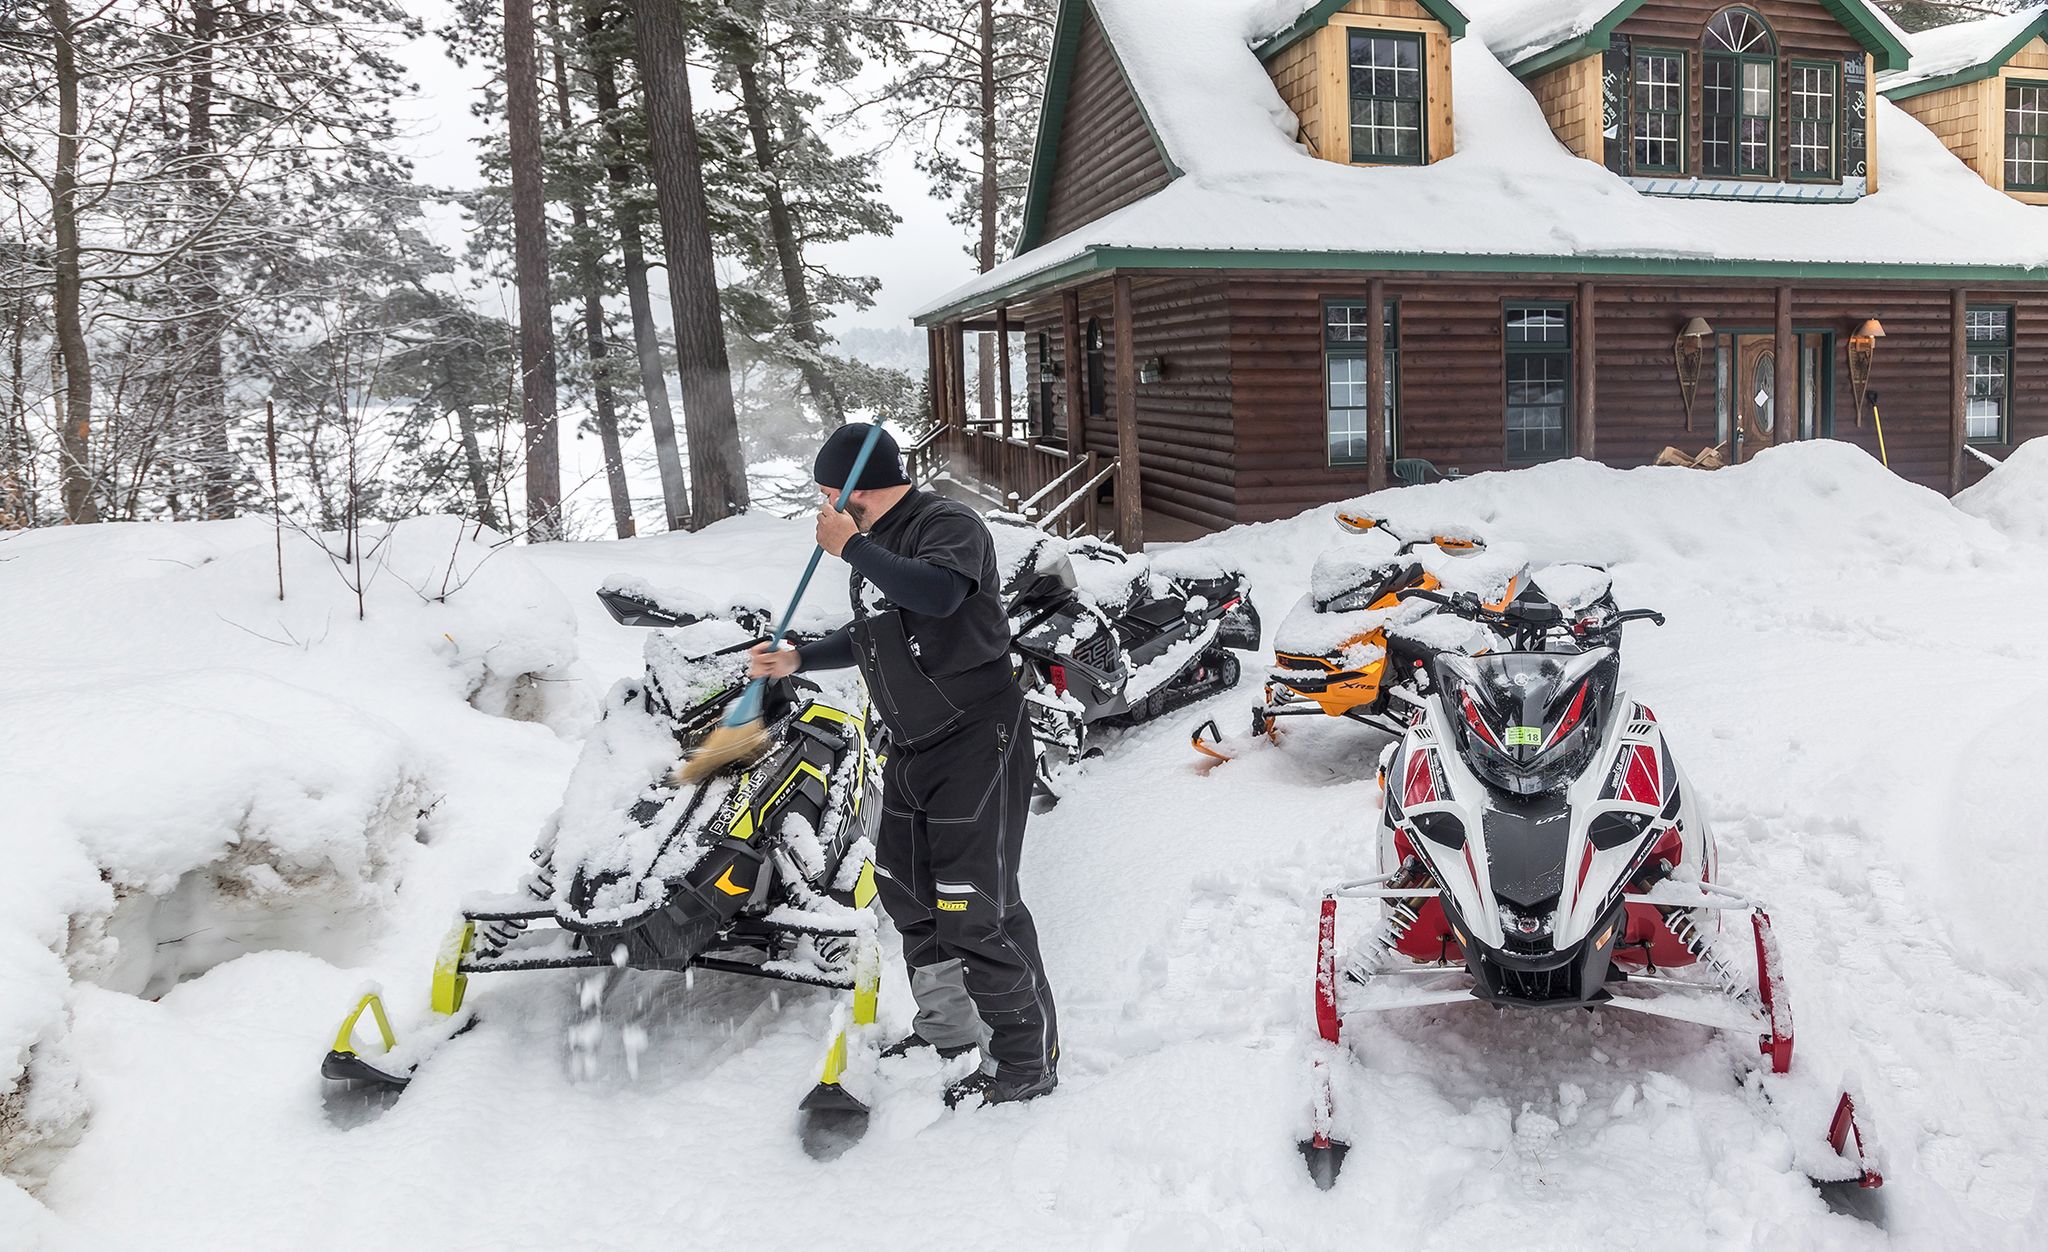 the baddest snowmobiles from polaris, skidoo, and yamaha tested